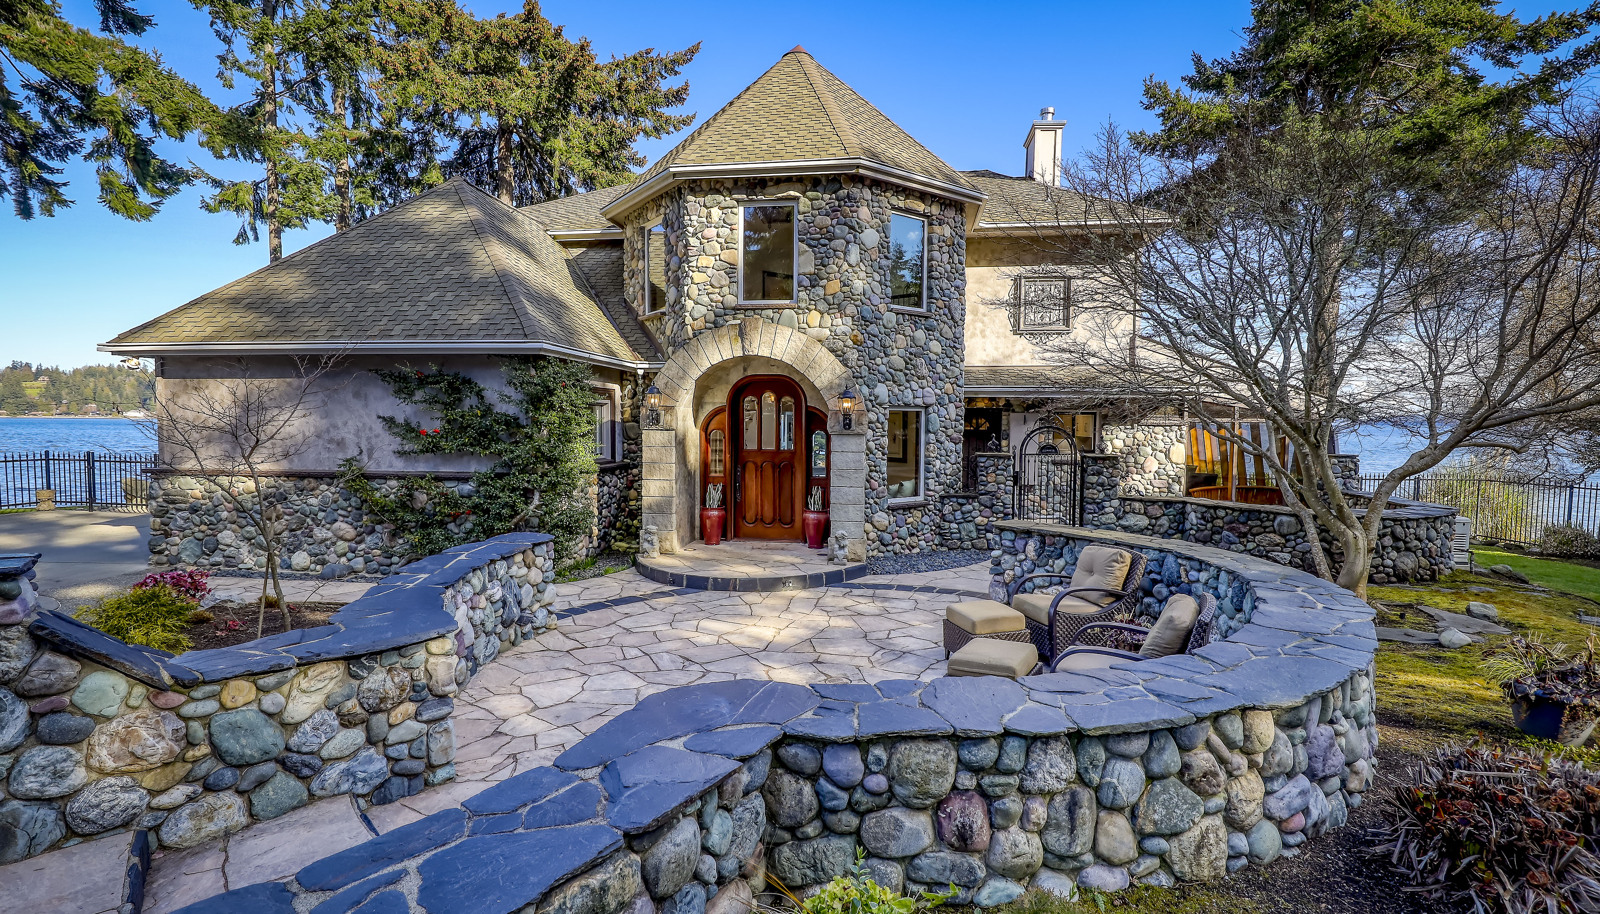 Exquisite real river rock and natural stone walls, patios, pathways, and siding.